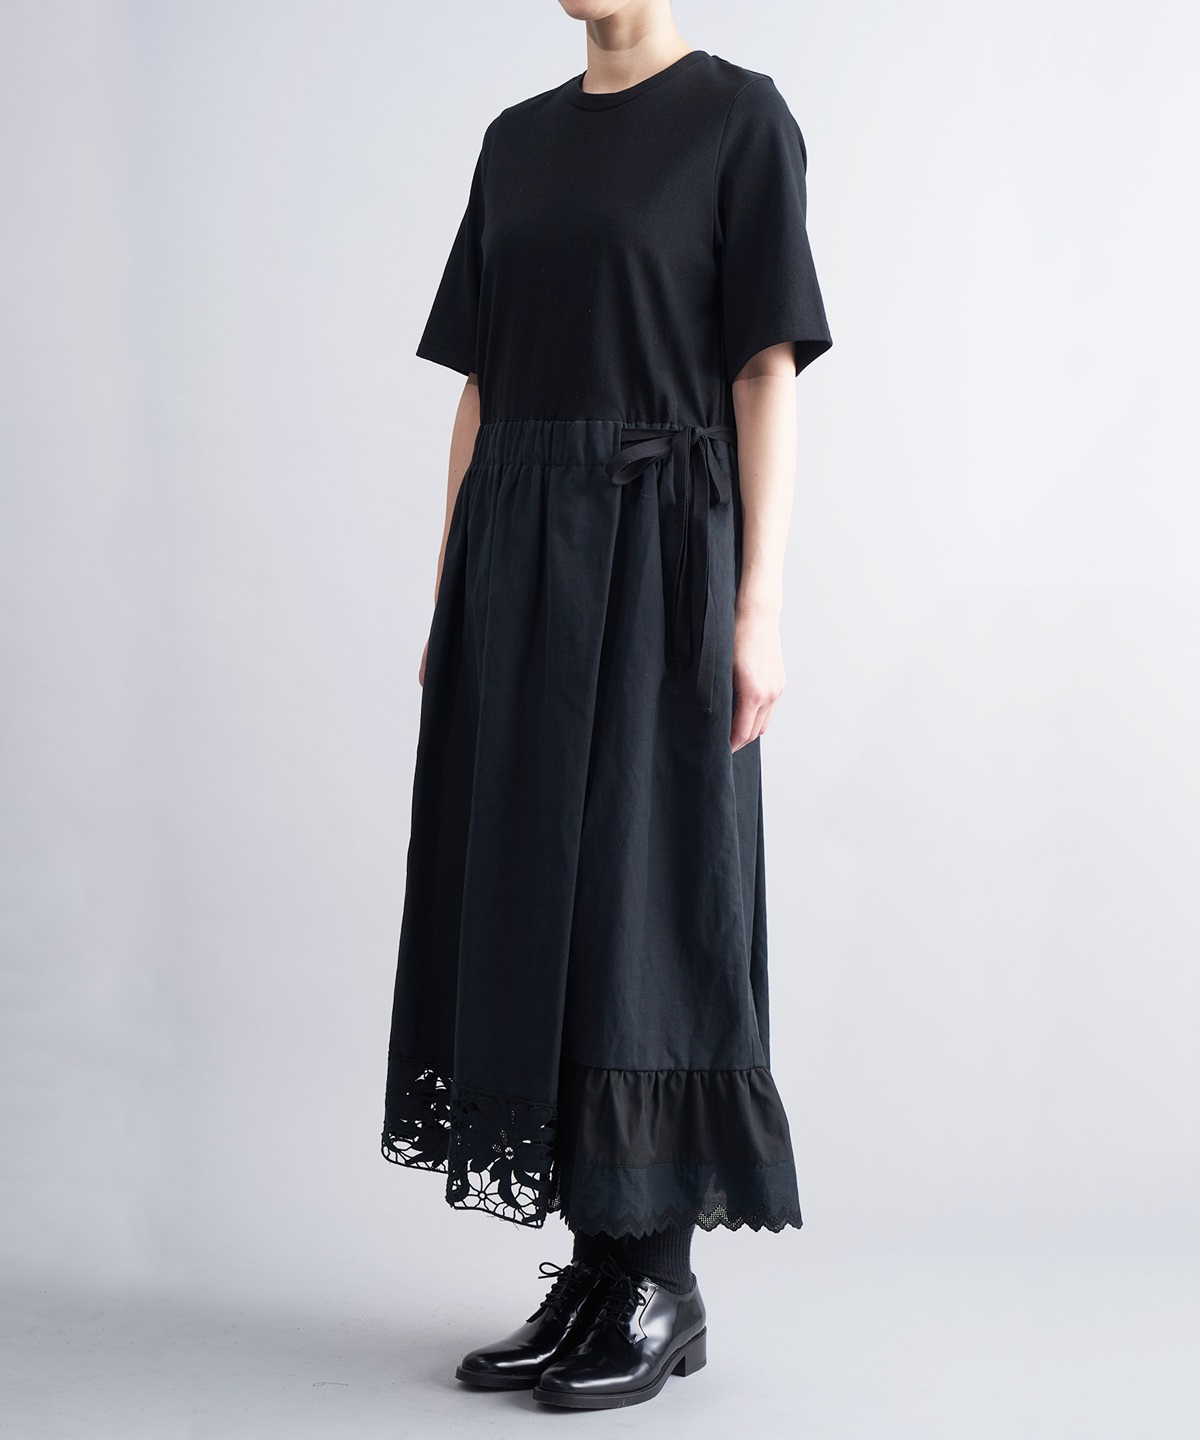 MUVEIL☆2019S/S HSプリントコンビジャージーワンピース | www ...